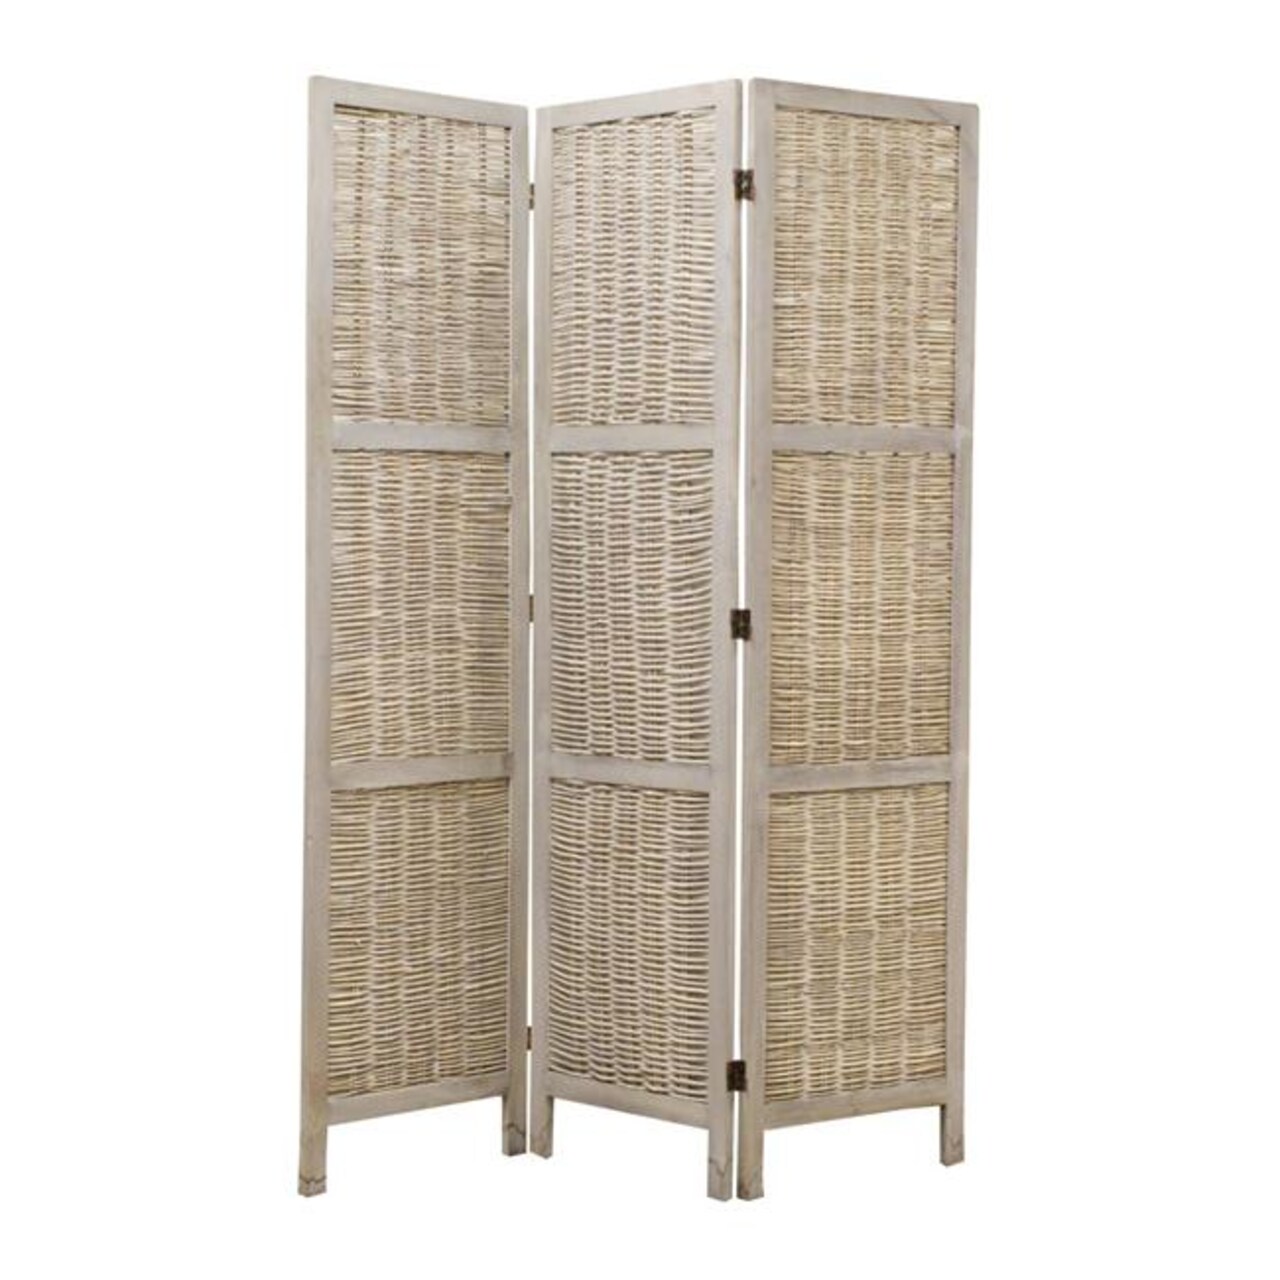 Benjara BM26577 Cottage Style 3 Panel Room Divider with Willow Weaving, Gray